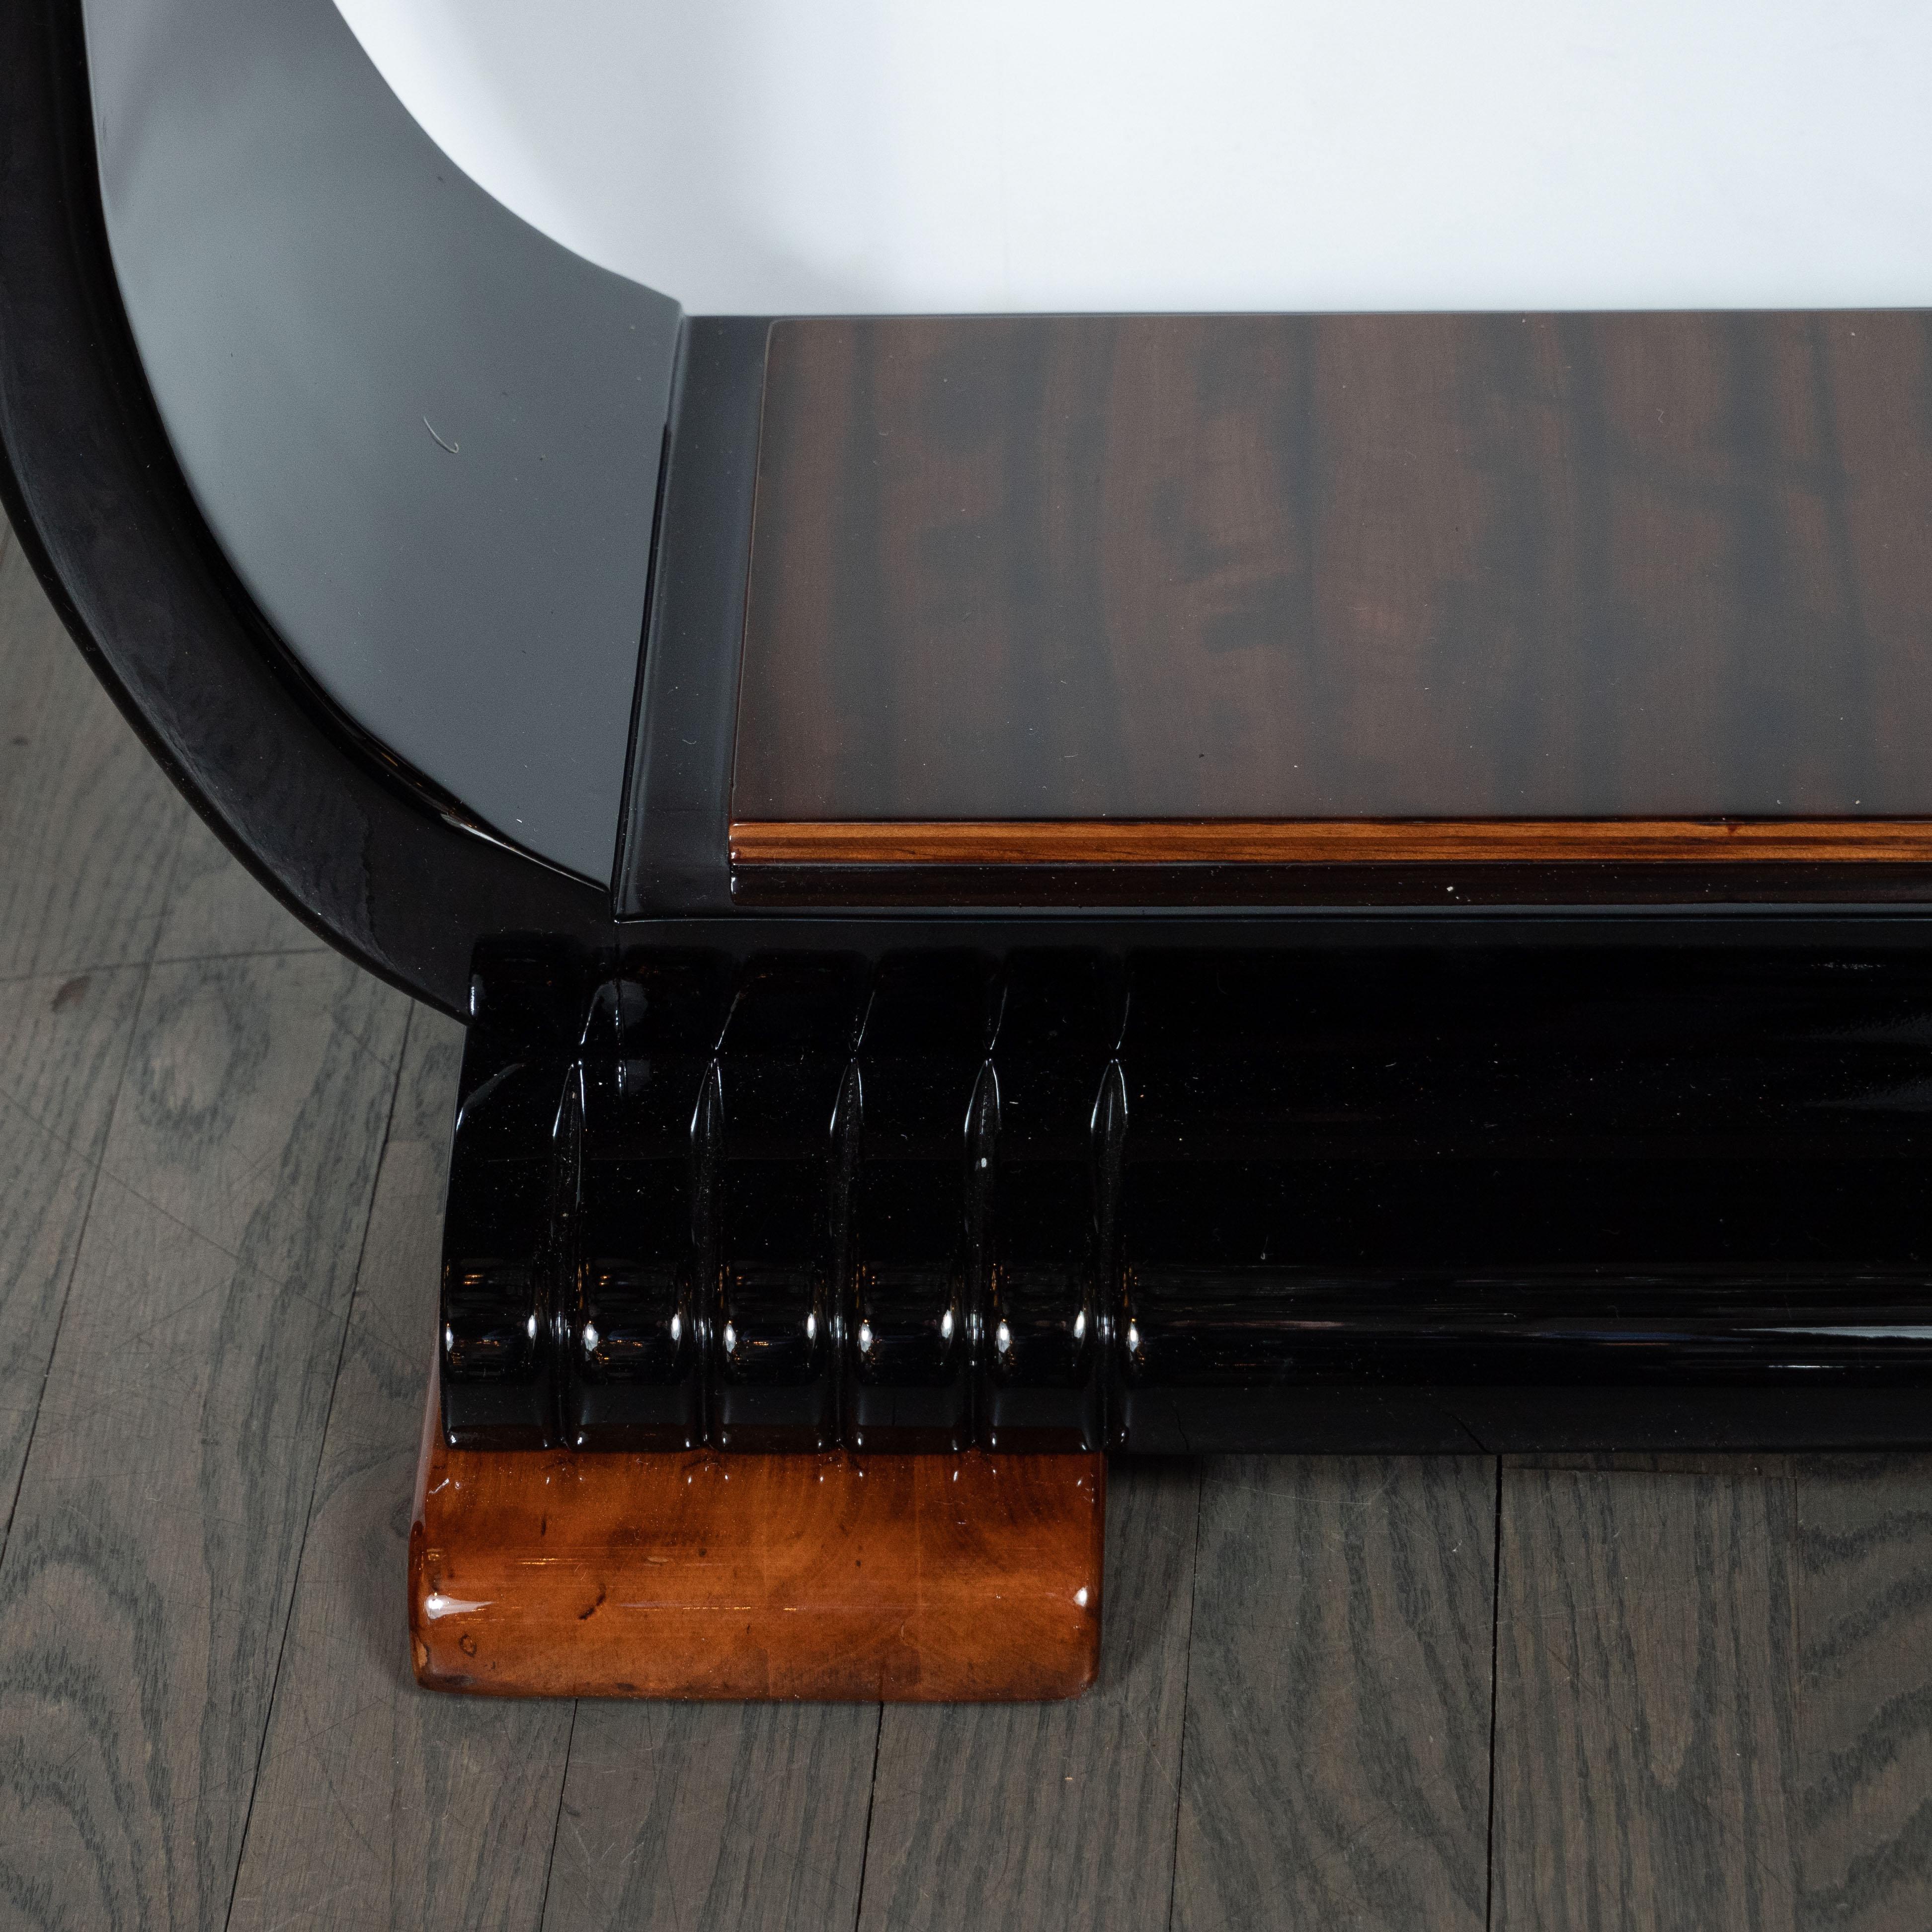 Art Deco Streamlined Black Lacquer, Bookmatched Walnut & Rosewood Console Table (Mitte des 20. Jahrhunderts)